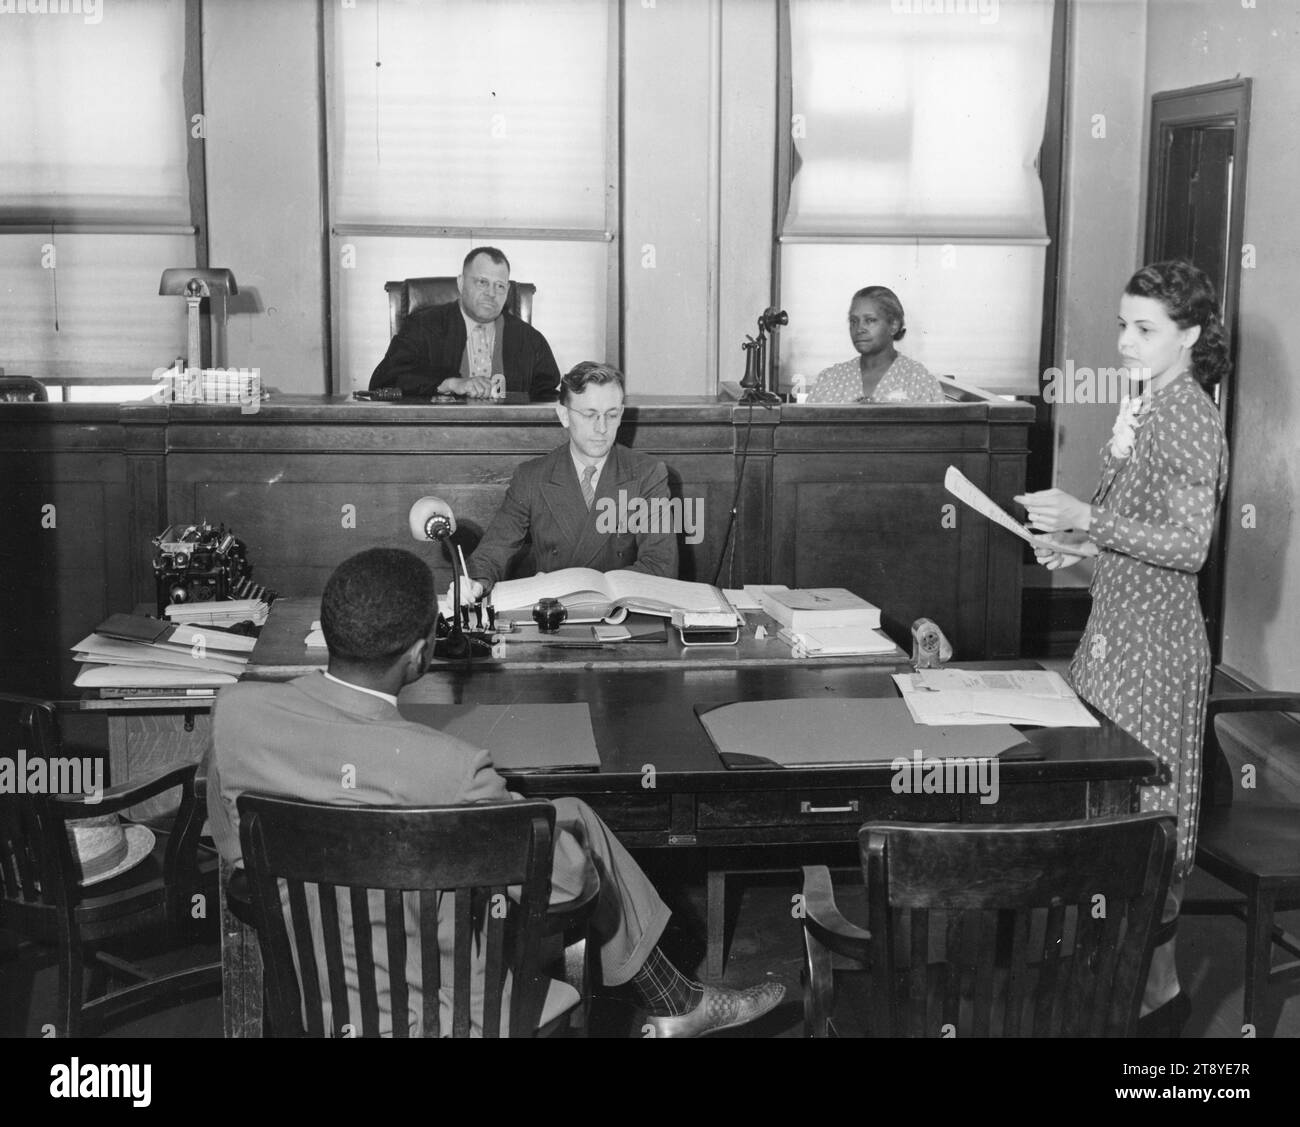 Courtroom scene of female lawyer pleading case. Minna Green (standing far right), of the General Foods Corporation Law Department, is a member of the New York Bar Association, and a graduate of Fordham Law School, New York, New York, circa 1945. Photo by Women's Bureau/Department of Labor Stock Photo